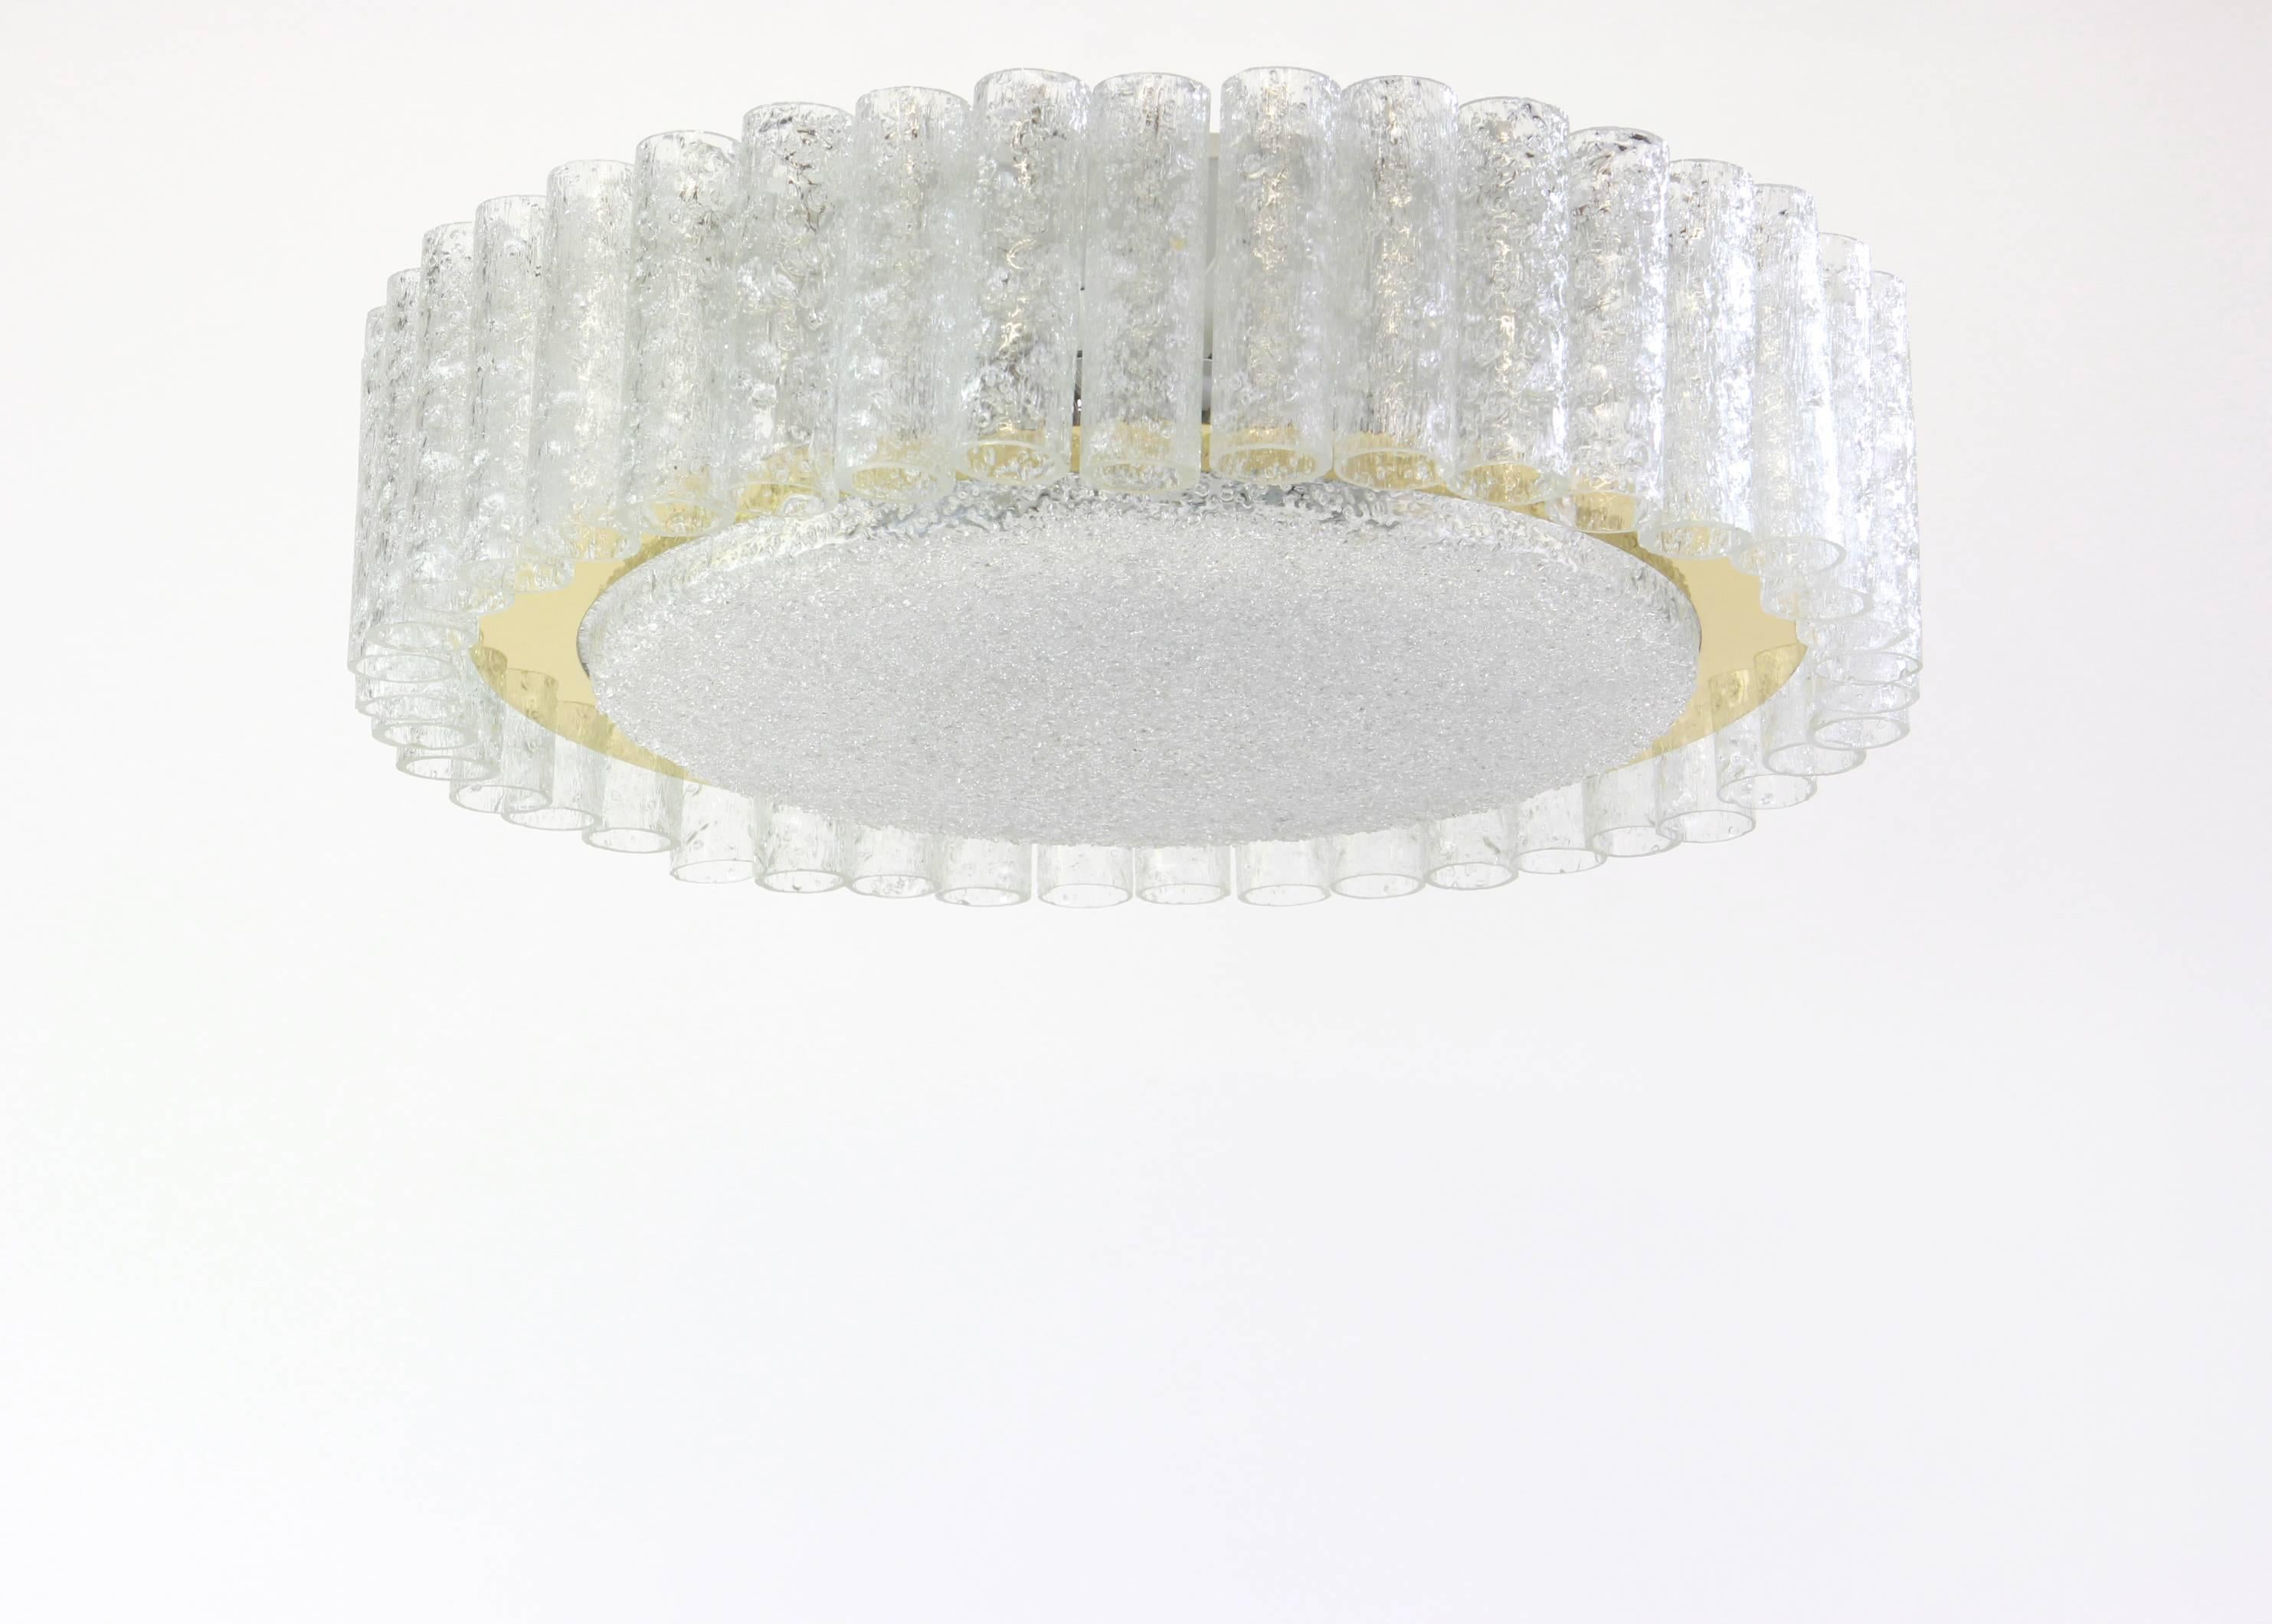 Fantastic big midcentury chandelier by Doria, Germany, manufactured, circa 1960-1969. Many Murano glass cylinders suspended from the fixture.

High quality and in very good condition. Cleaned, well-wired and ready to use. 

The fixture requires